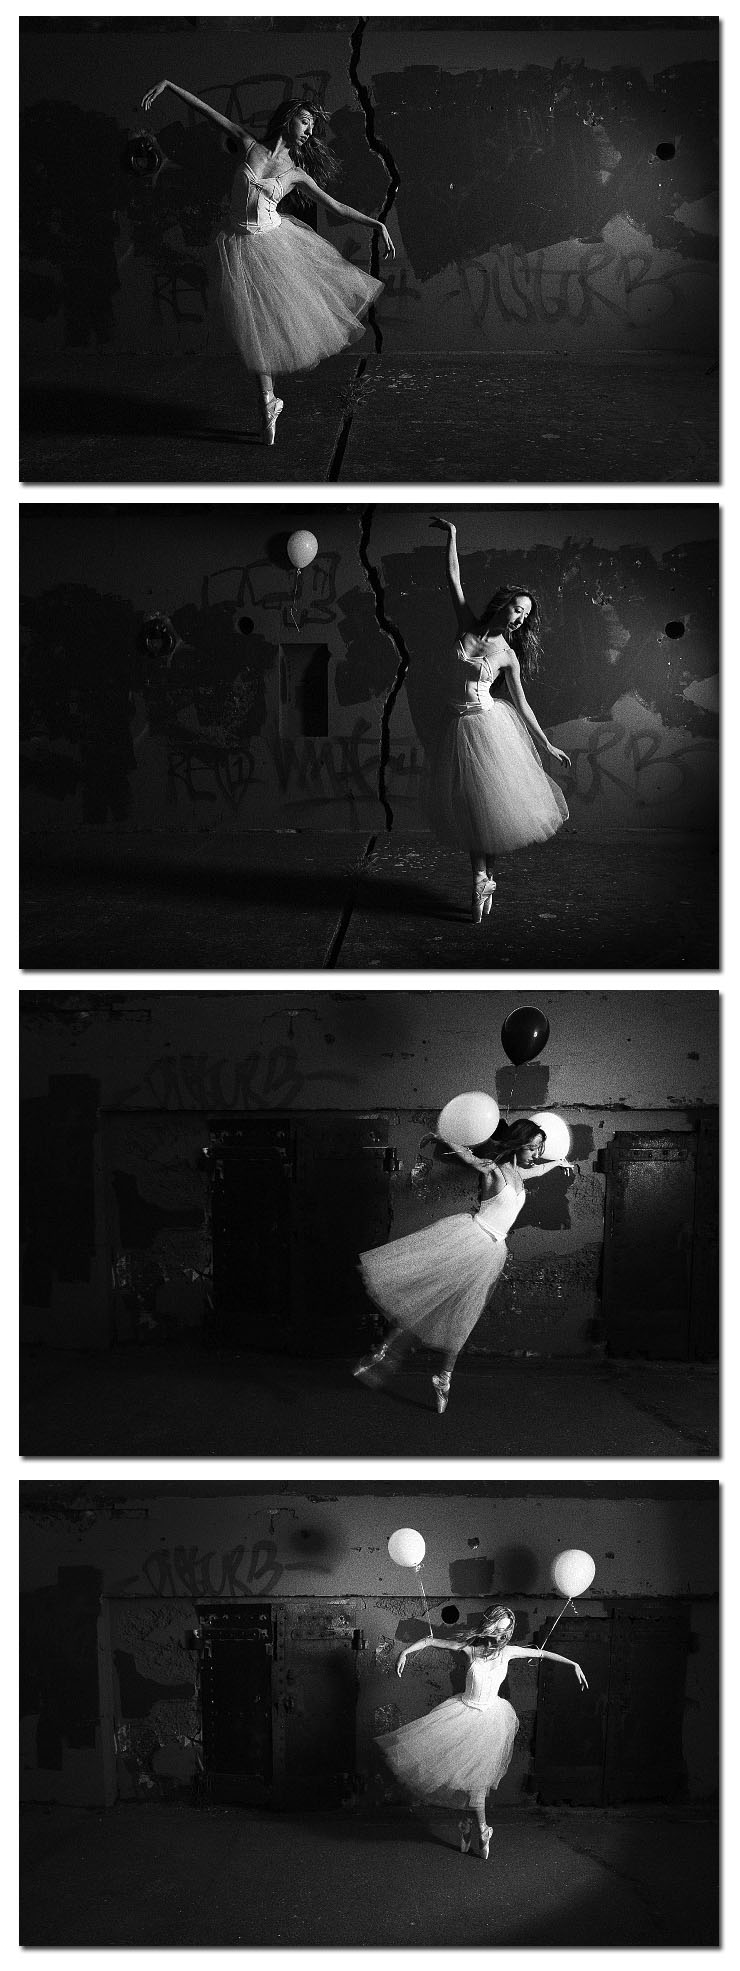 Male and Female model photo shoot of Memory of a Dream Photo and Zaychik  in Abandoned Artillery Bunker